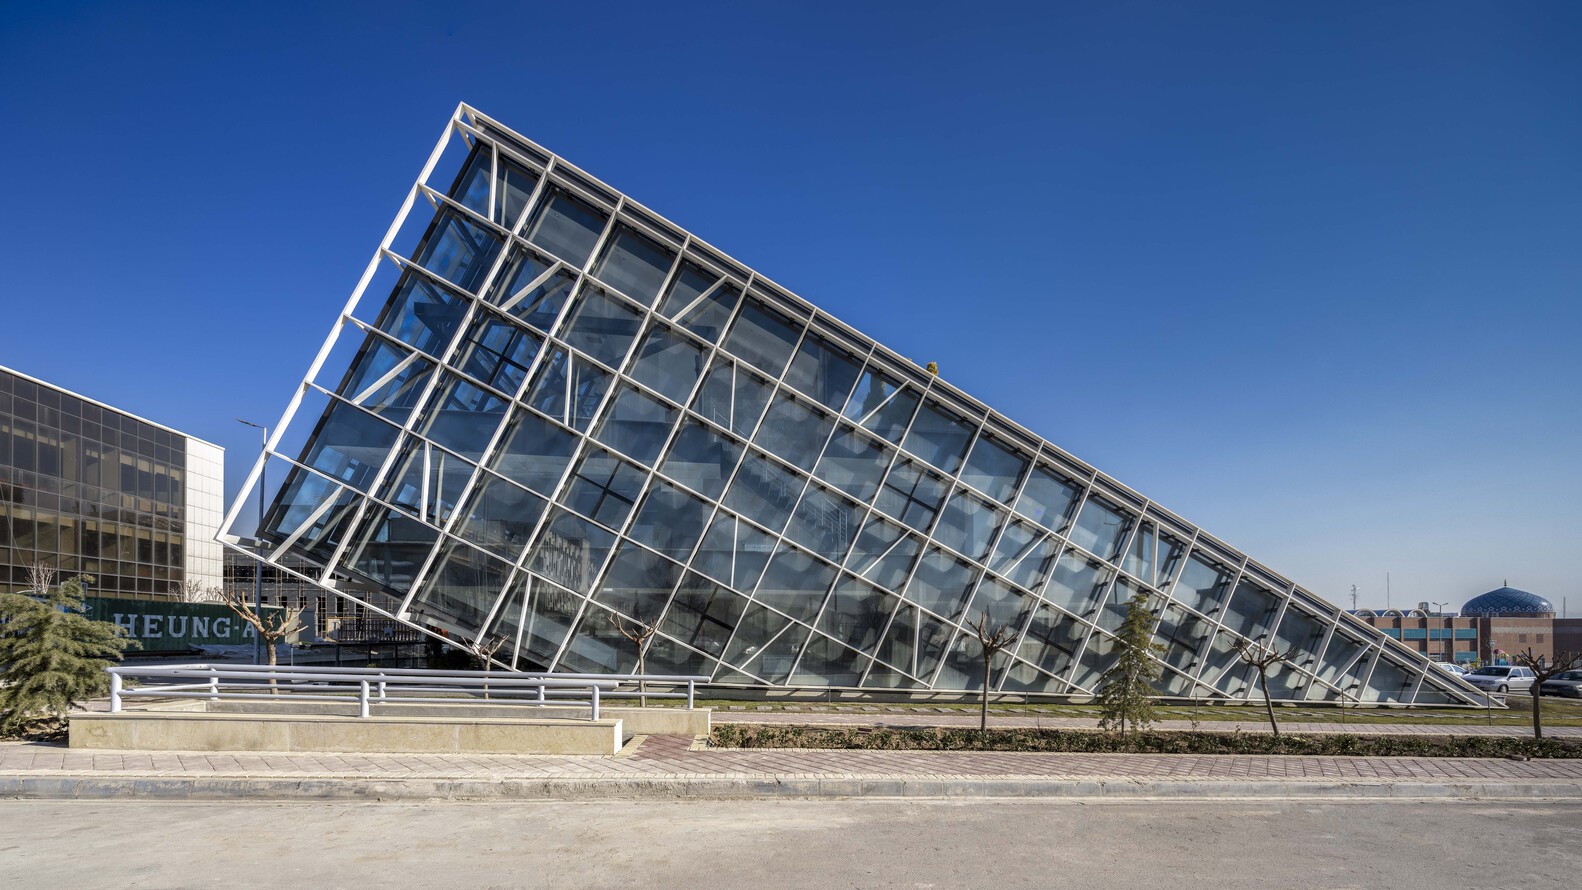 The new incubator and office building Turbosealtech designed by New Wave Architecture